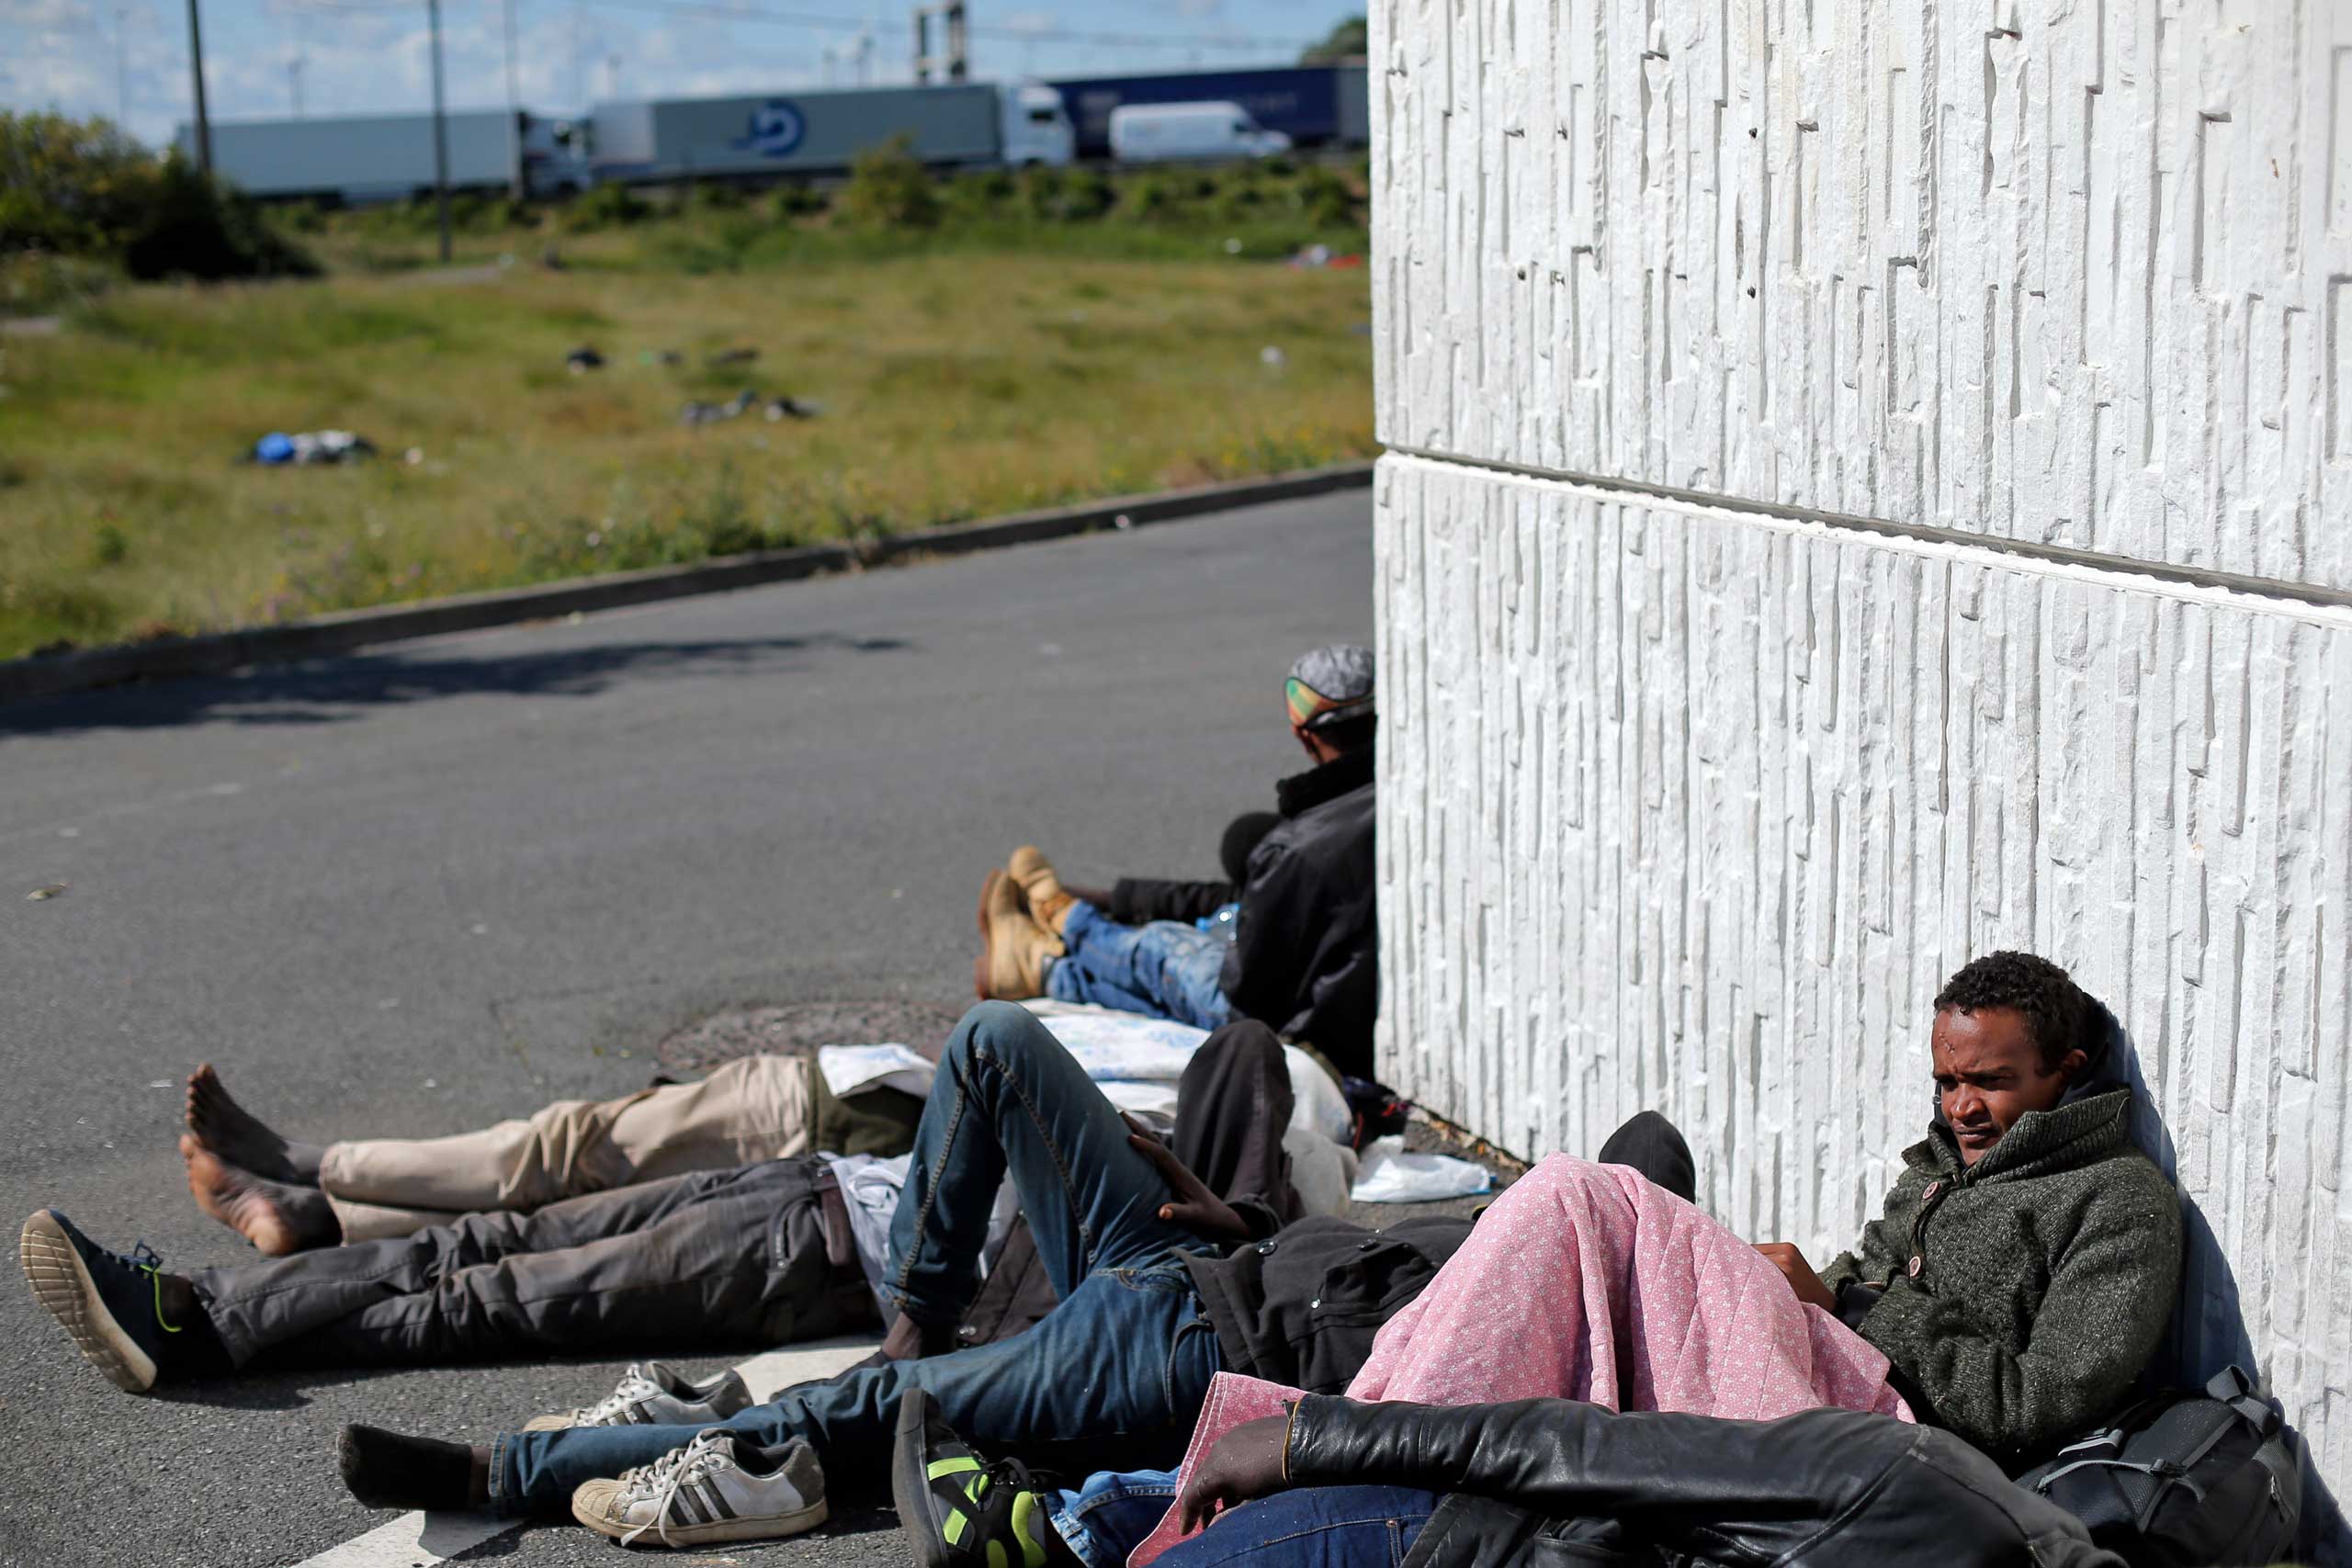 Migrants wait near a motorway leading to the ferry port to cross the English channel on July 29, 2015.